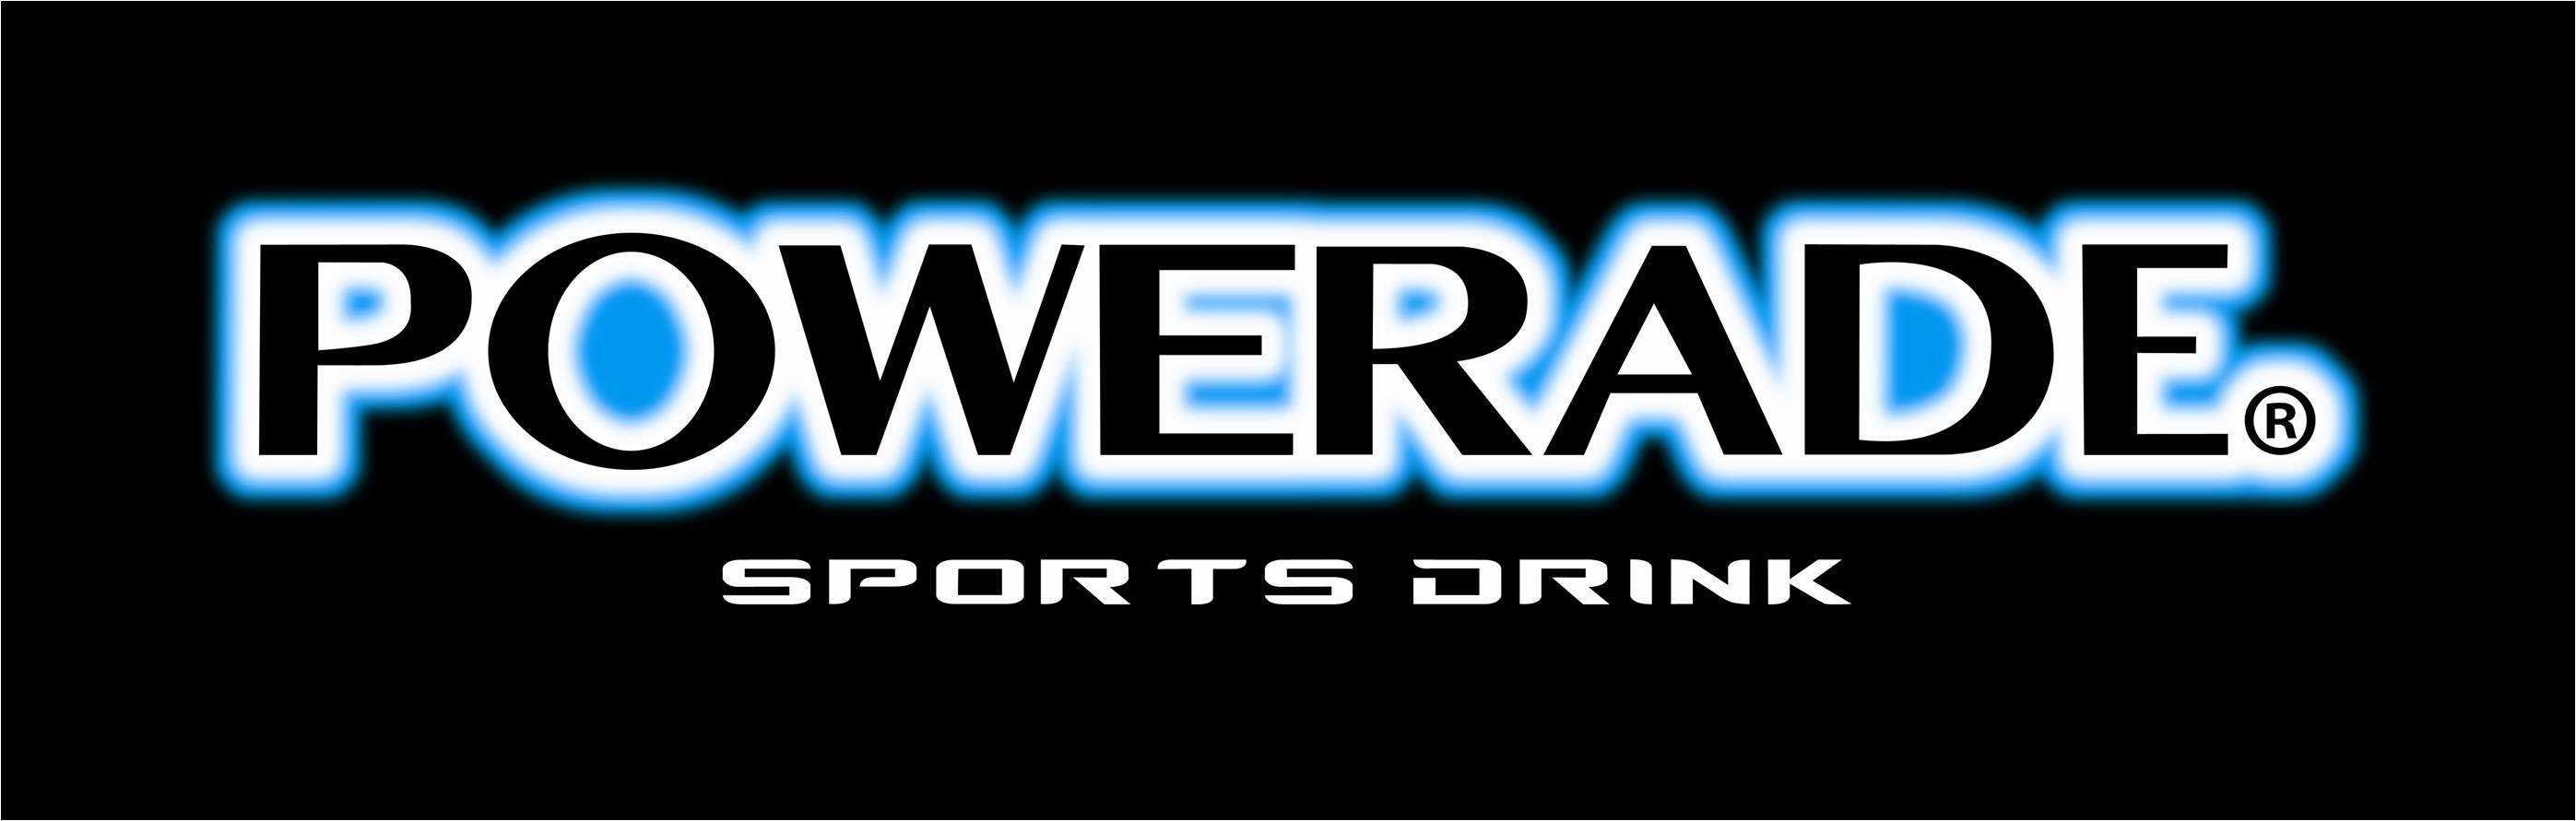 Sports Drink Logo - Powerade Sports Drink Just what I need to keep me pumped! « Little